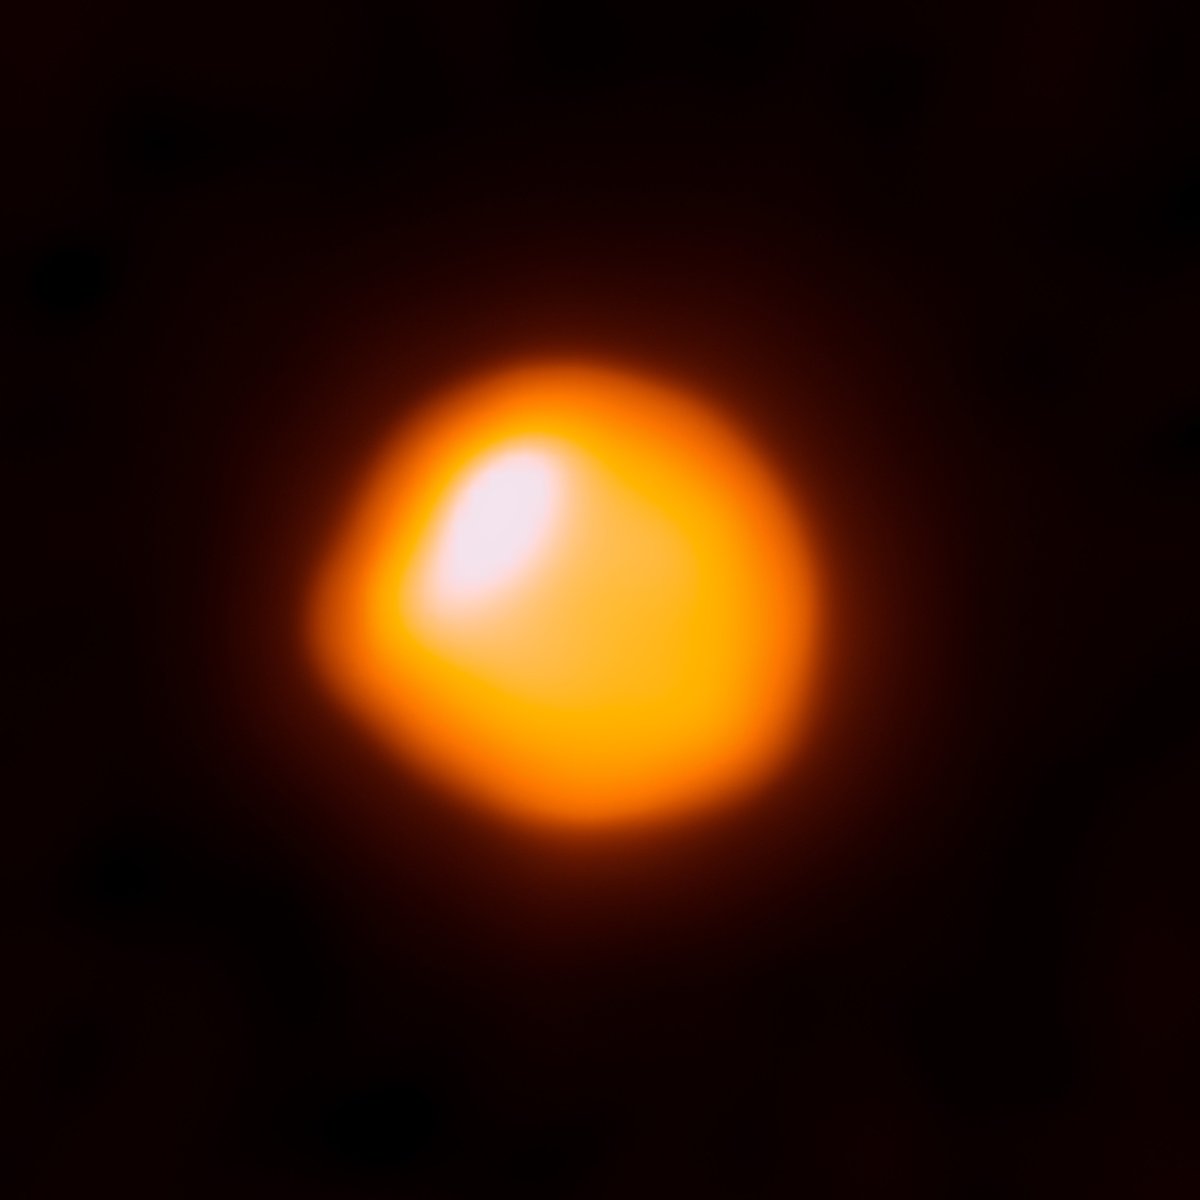 Monthly Roundup: Betelgeuse, Betelgeuse, Betelgeuse Three recent studies of the famous red supergiant examine the aftermath of the Great Dimming, probe the possibility of a stellar merger, and reconsider some critical evidence. aasnova.org/2024/03/13/mon…